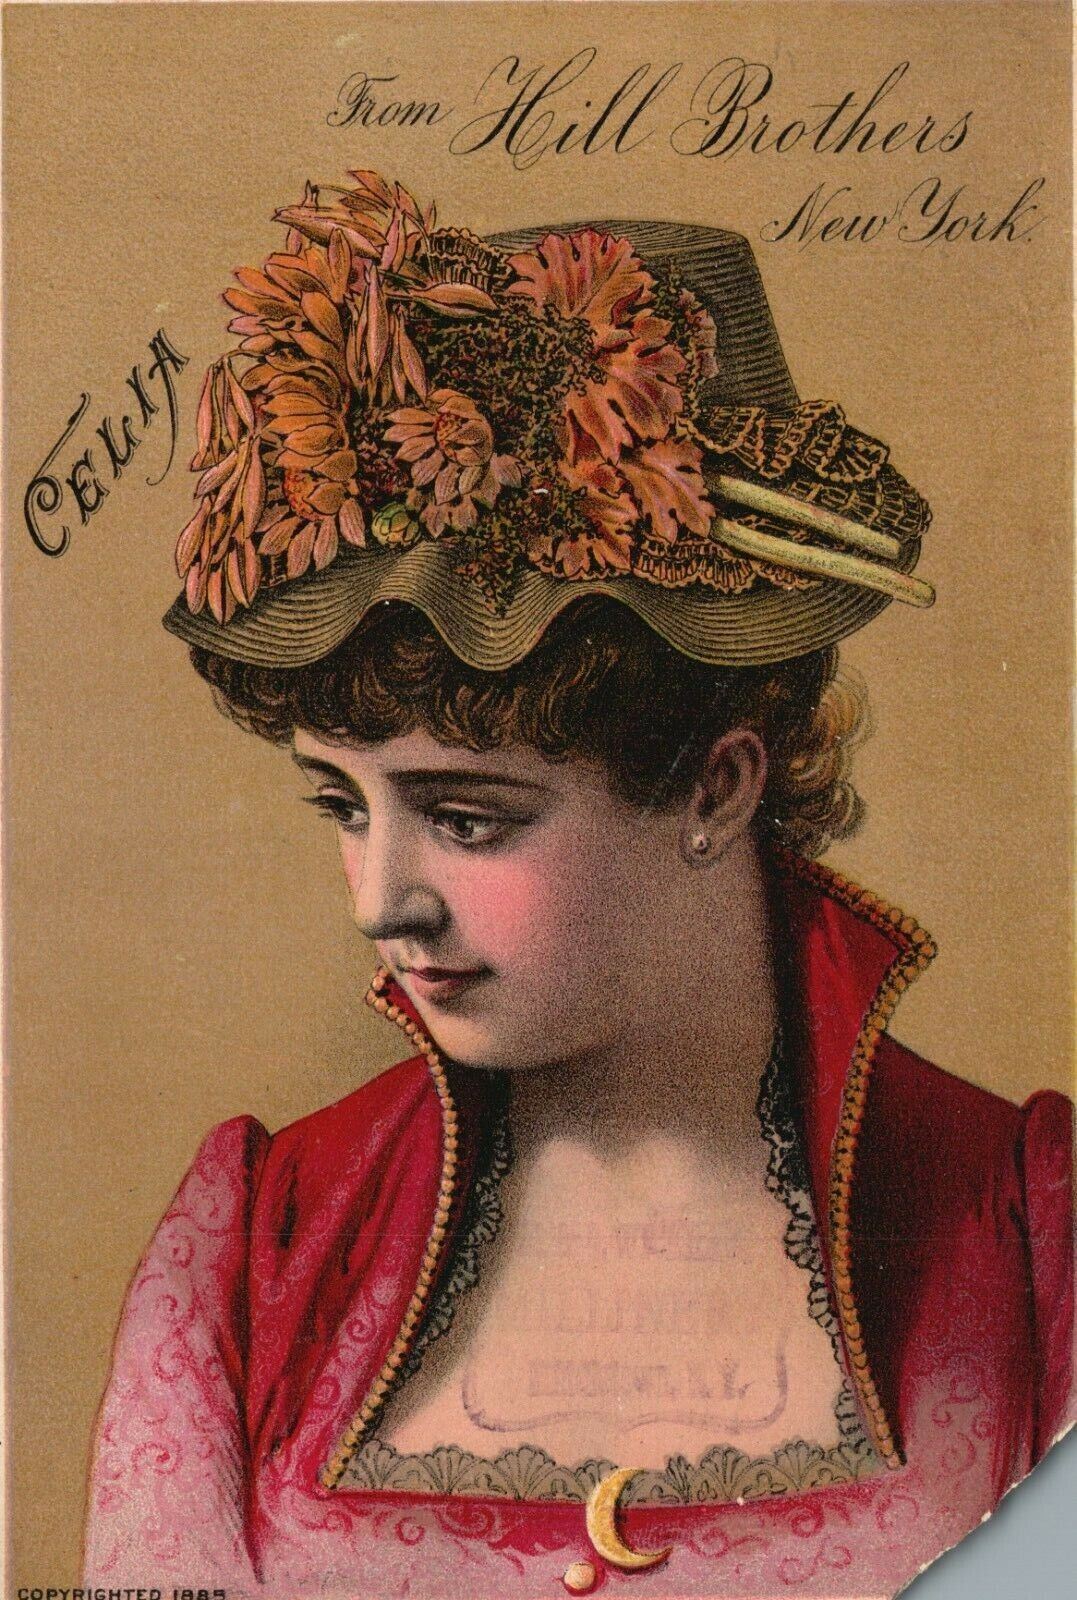 1880s-90s Young Girl Dressed Celia Hill Brothers Millinery Goods Trade Card